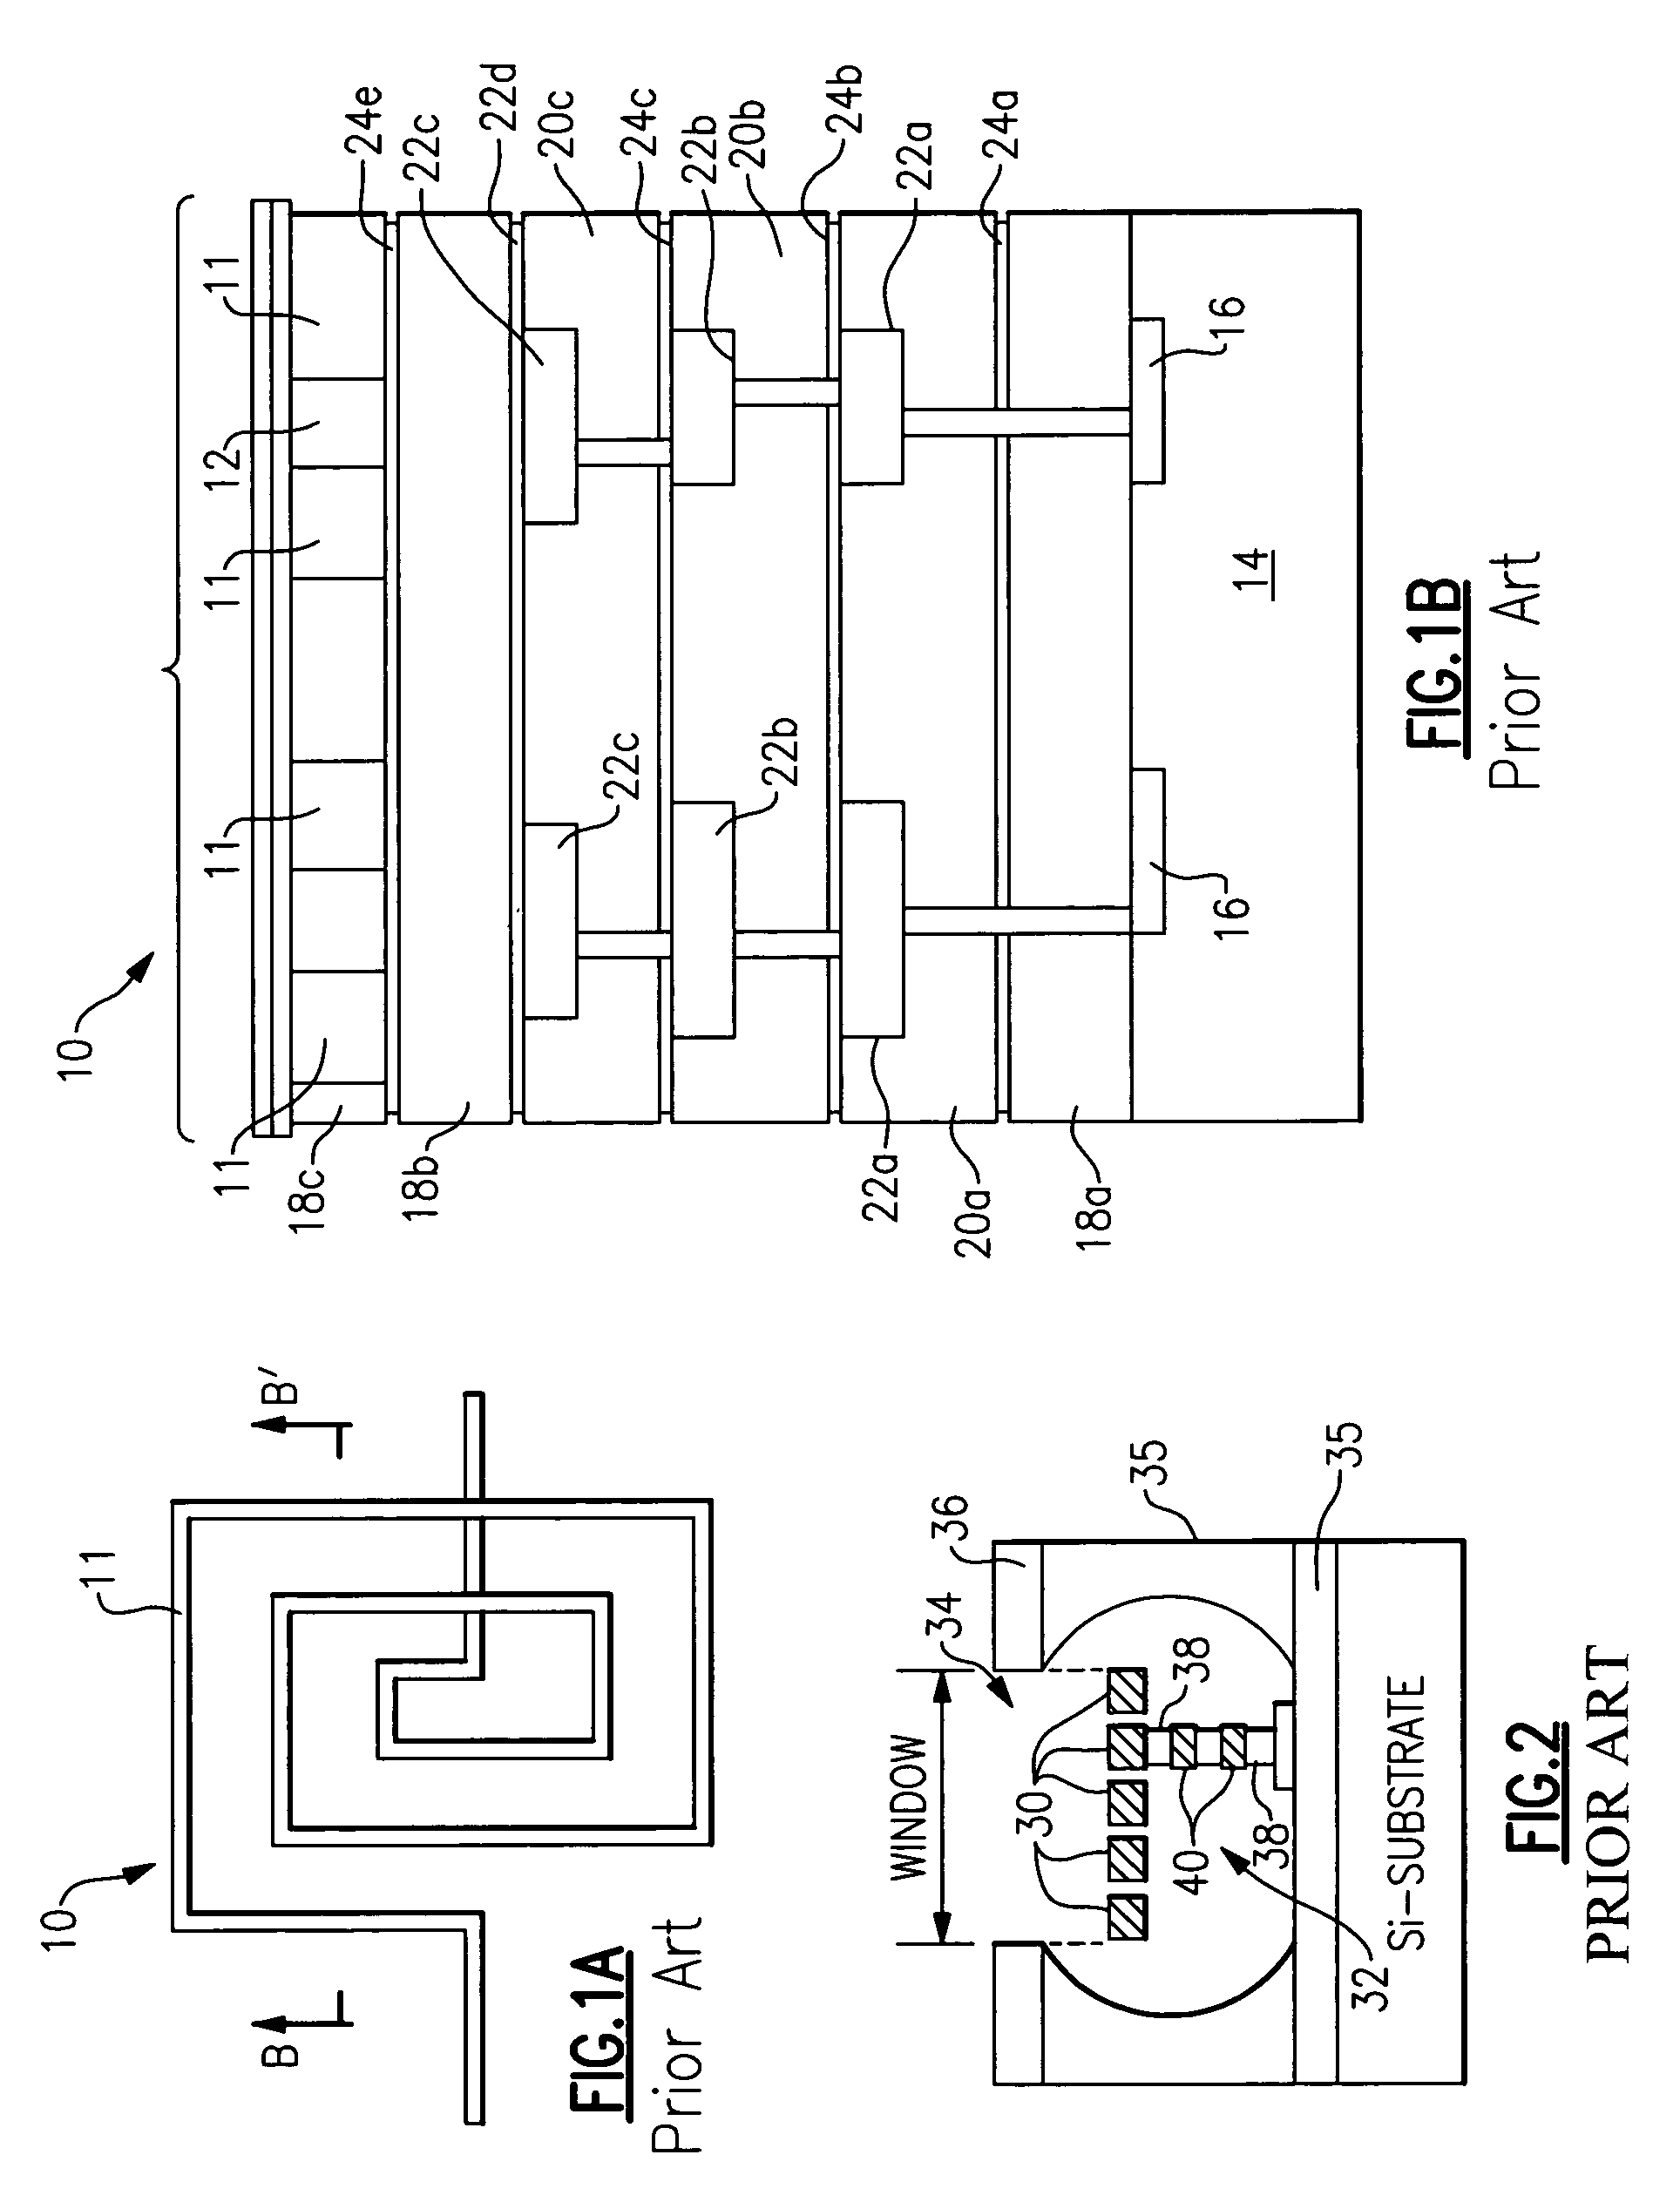 Air gap under on-chip passive device